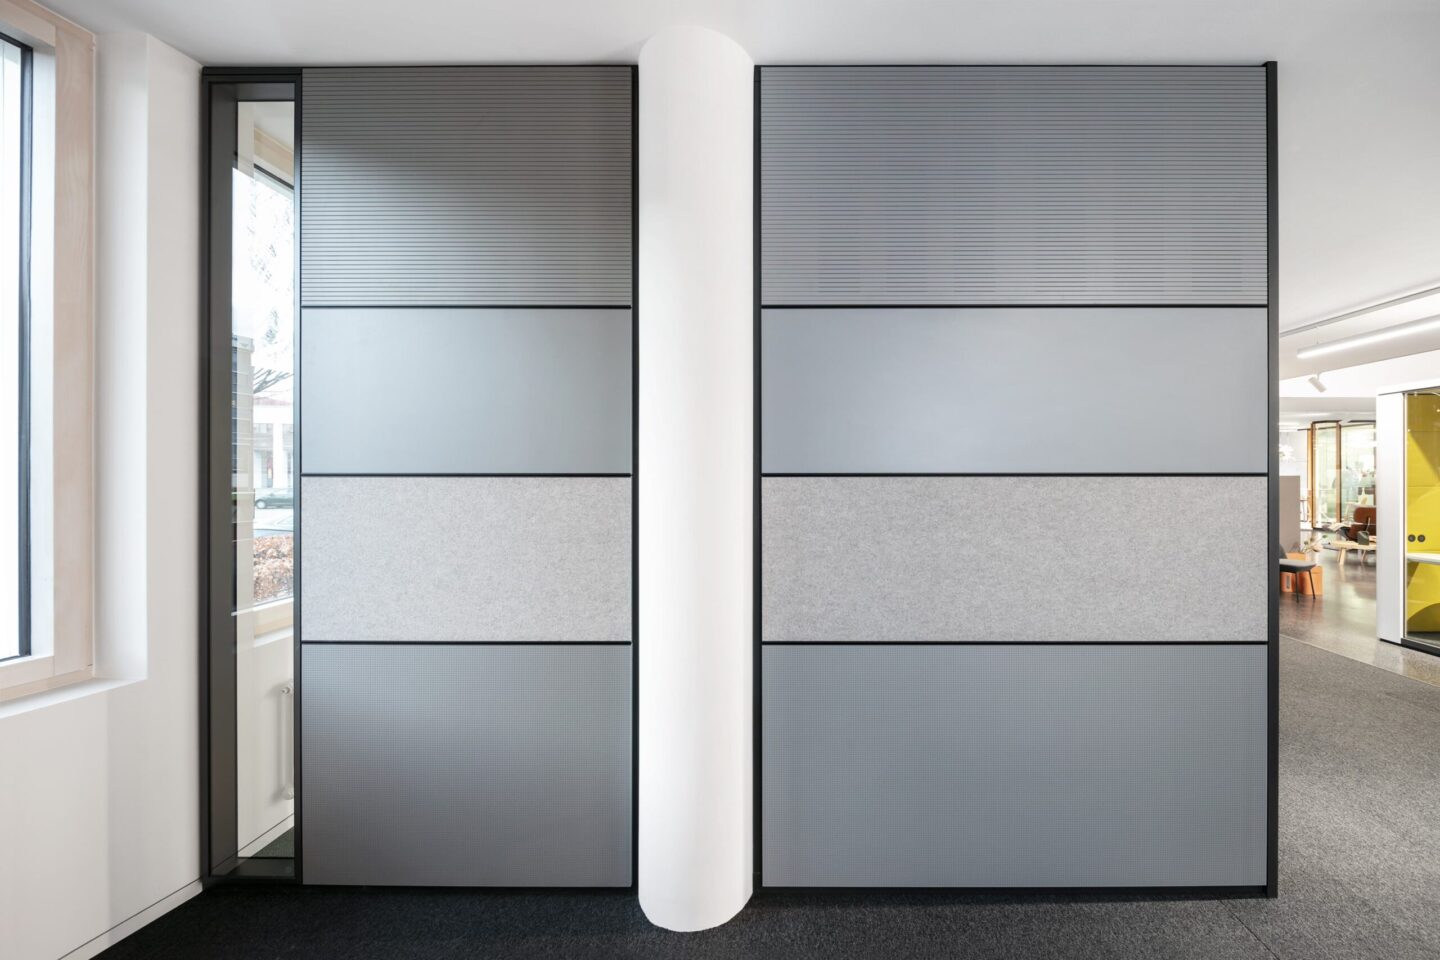 feco-feederle│partition wall systems│solid wall